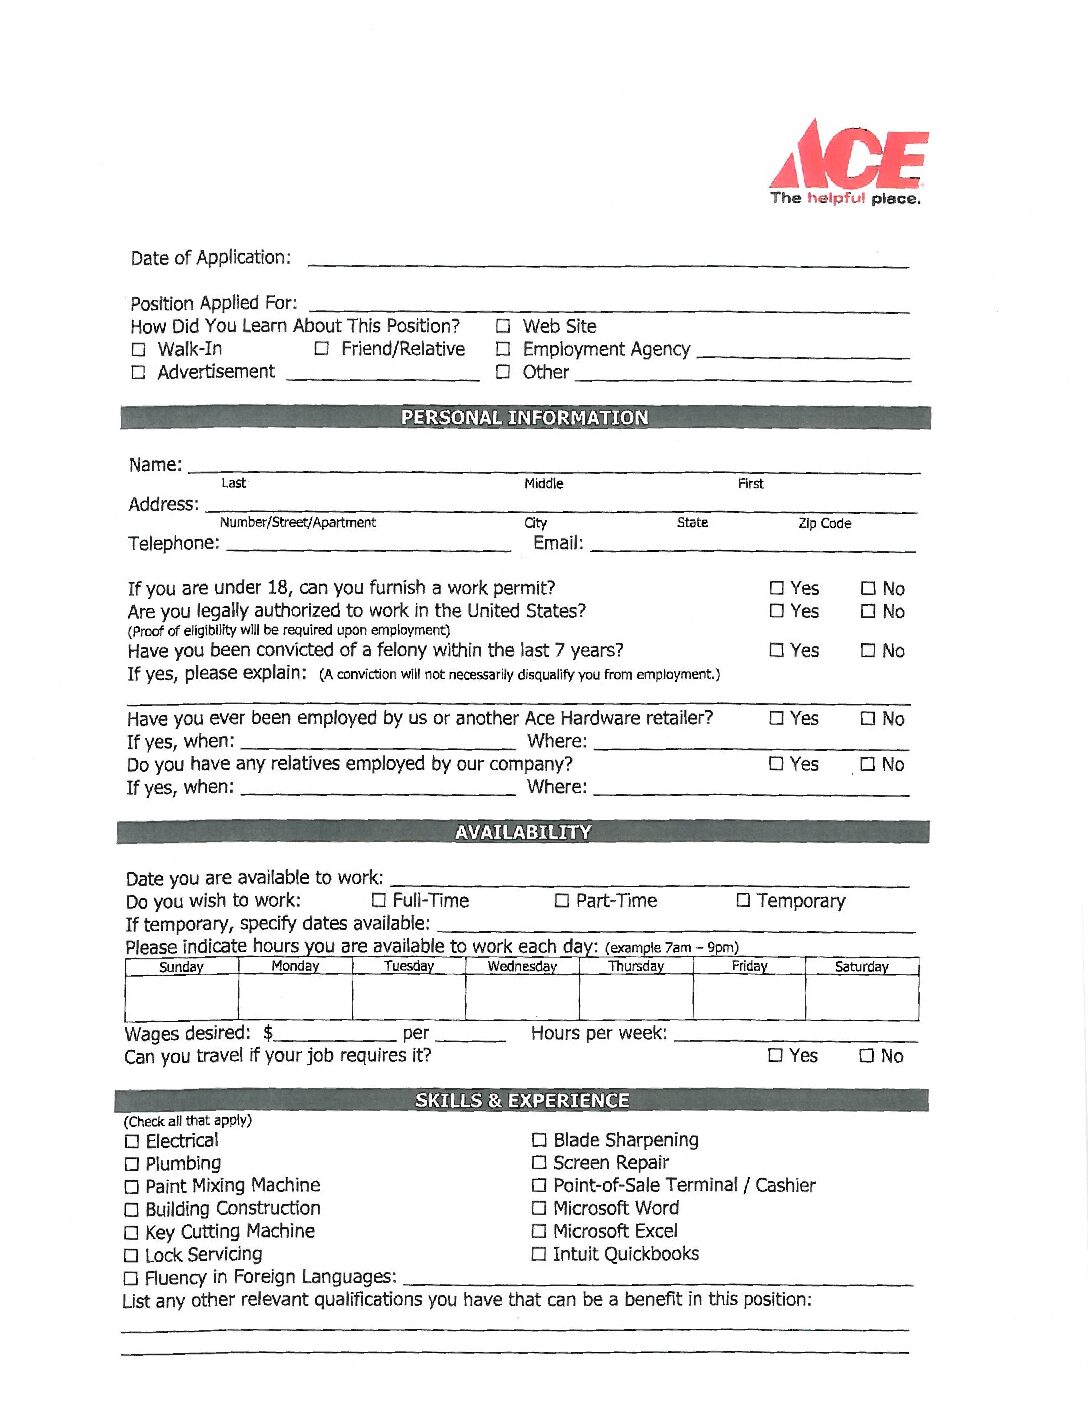 Printable Application For Ace Hardware